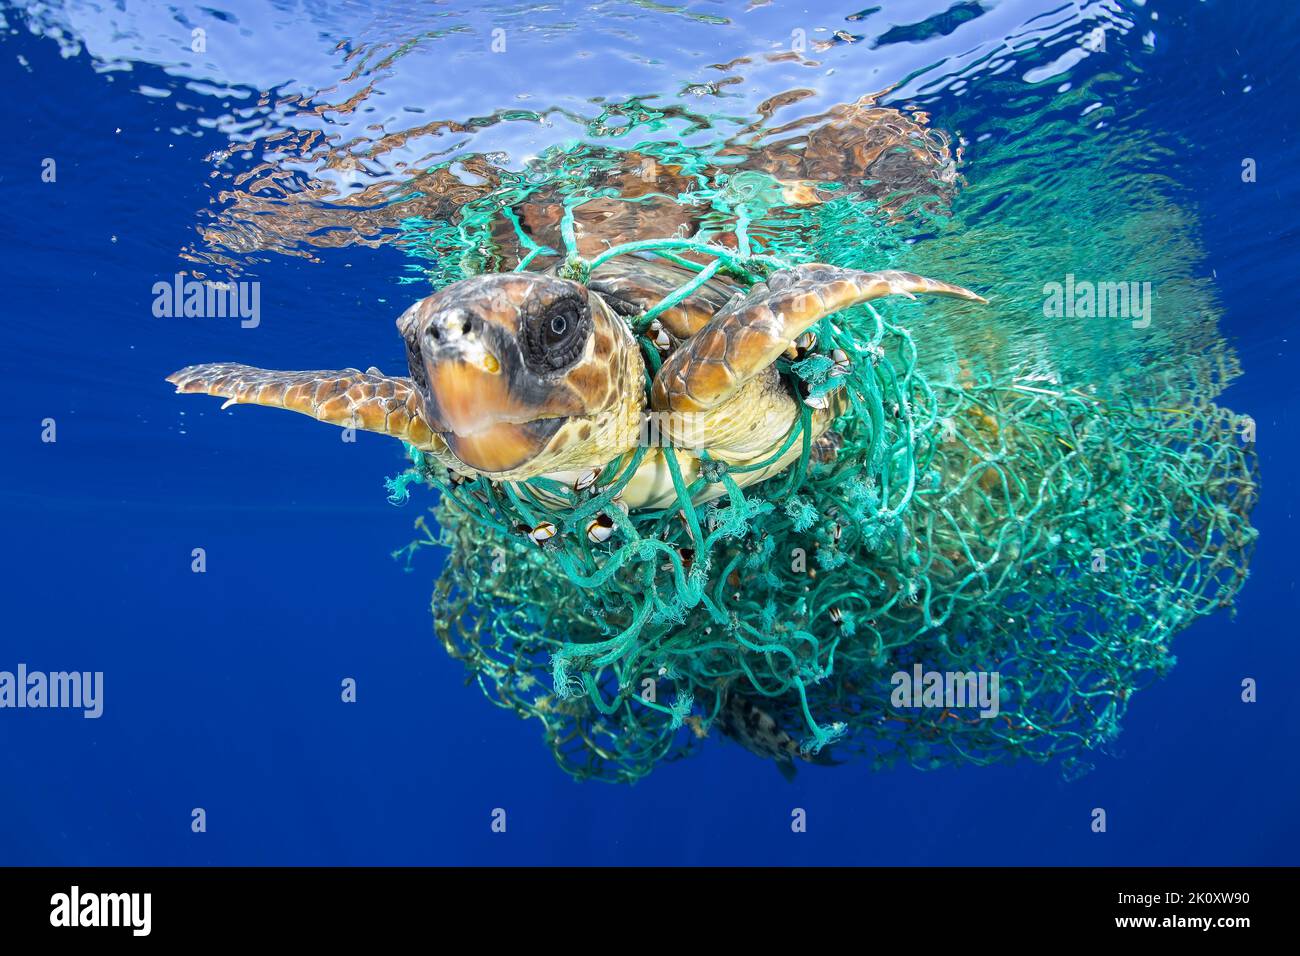 This poor turtle was trapped in a fishing net. Canary Islands: THESE HEARTBREAKING images show a Loggerhead sea turtle tangled in ocean netting. One i Stock Photo